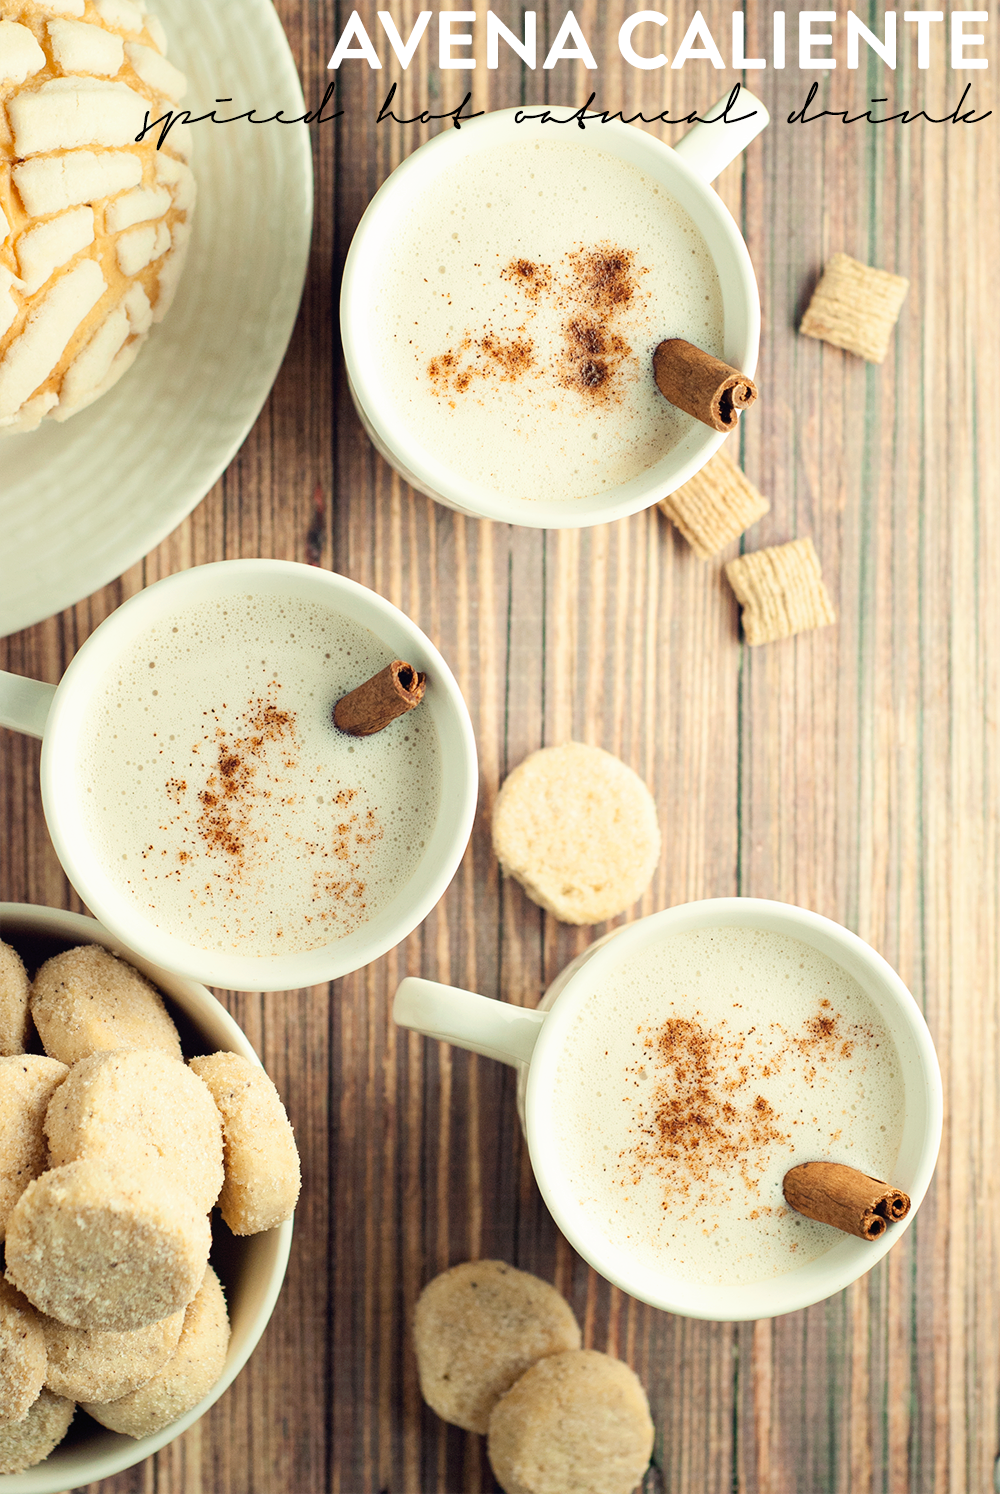 Warm your soul with this amazingly flavorful Avena Caliente (Spiced Hot Oatmeal Drink), perfect for cold winter nights!